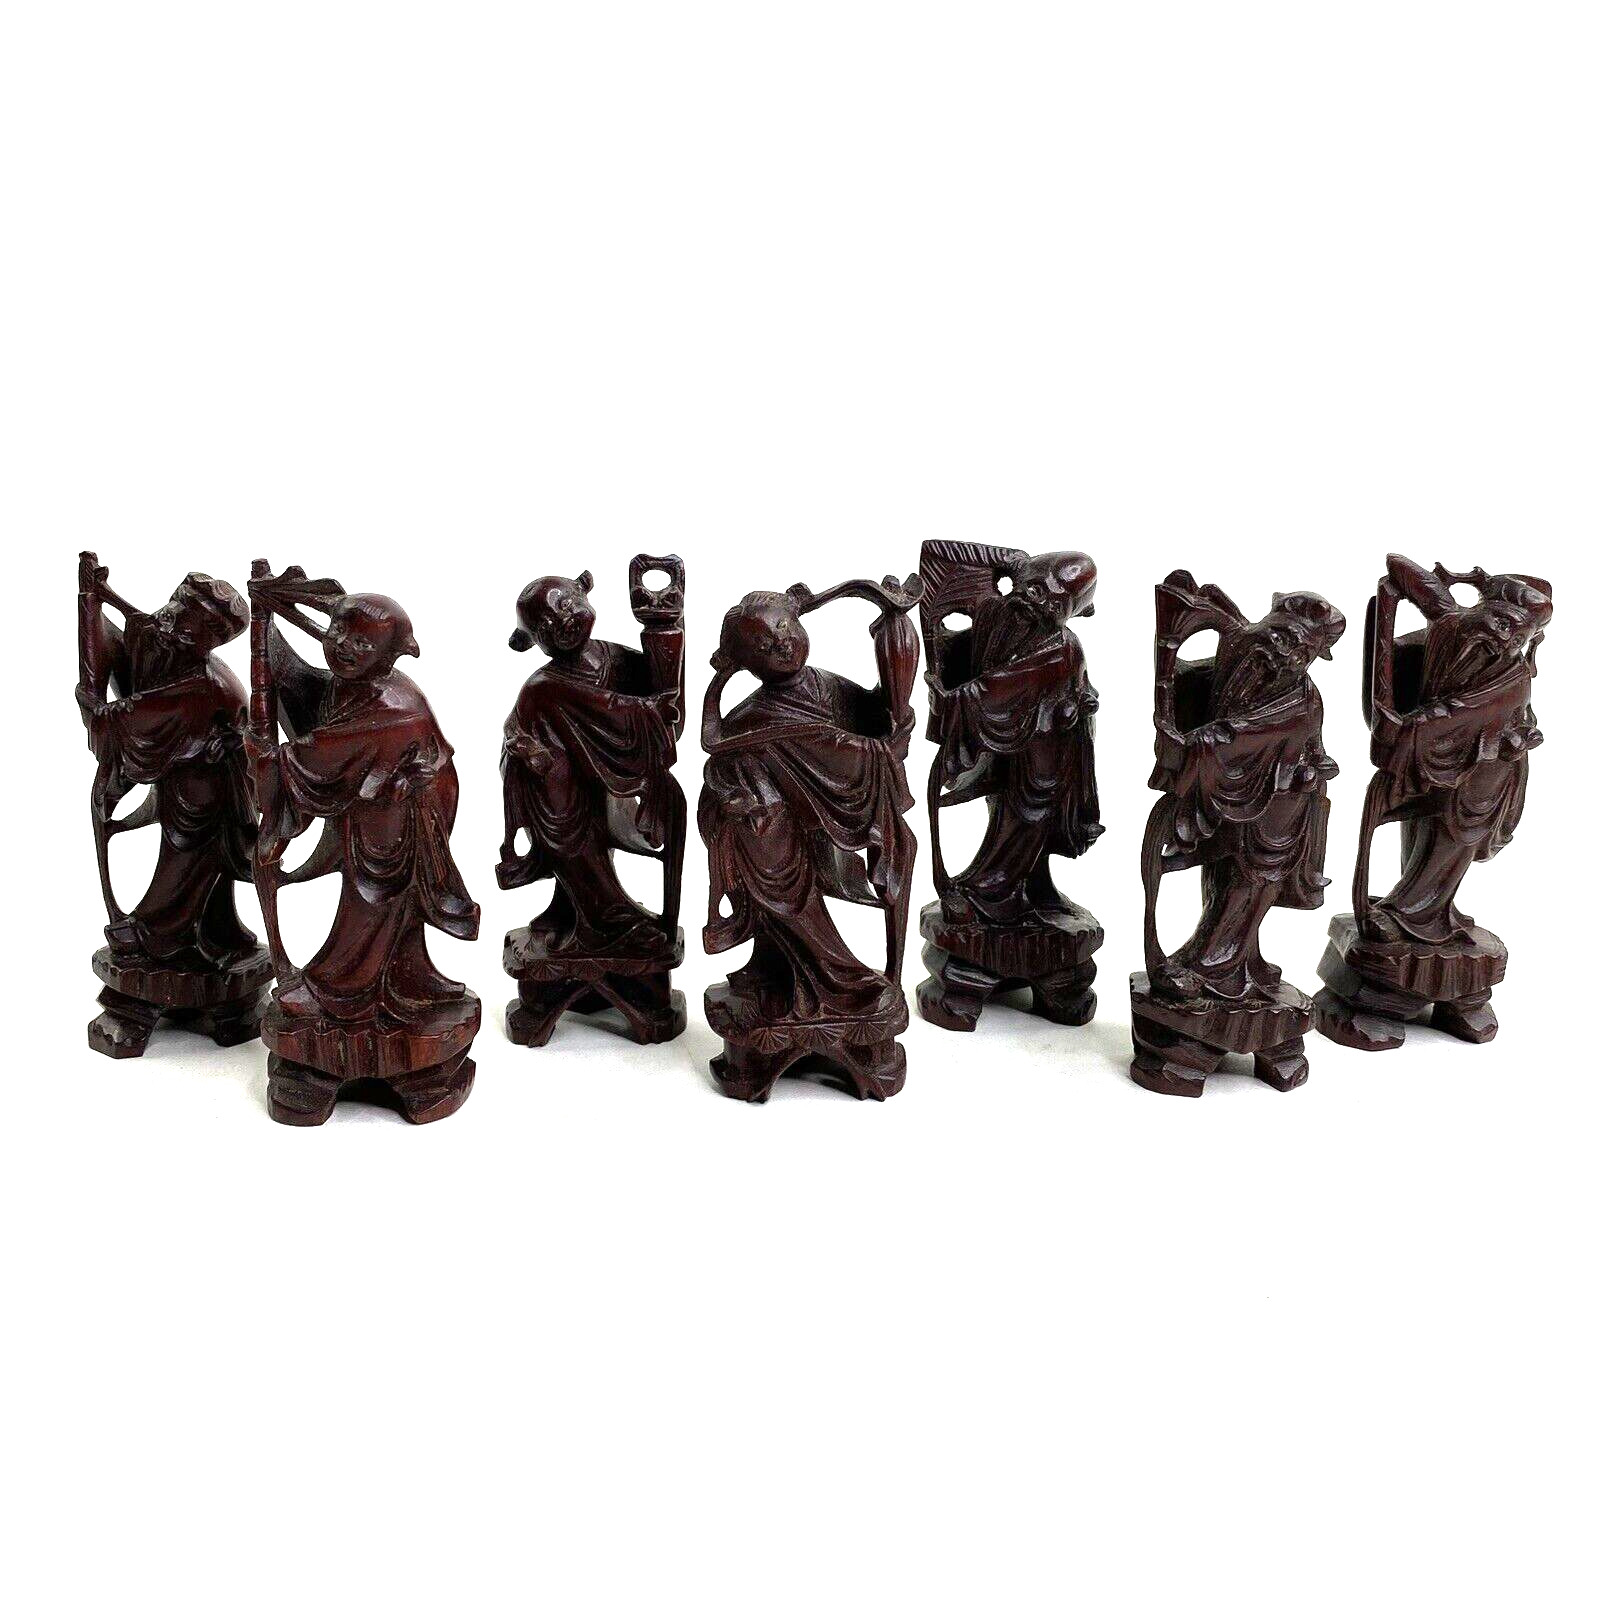 Vintage Carved Wooden Asian Figurines Lot of 7 Detailed 4